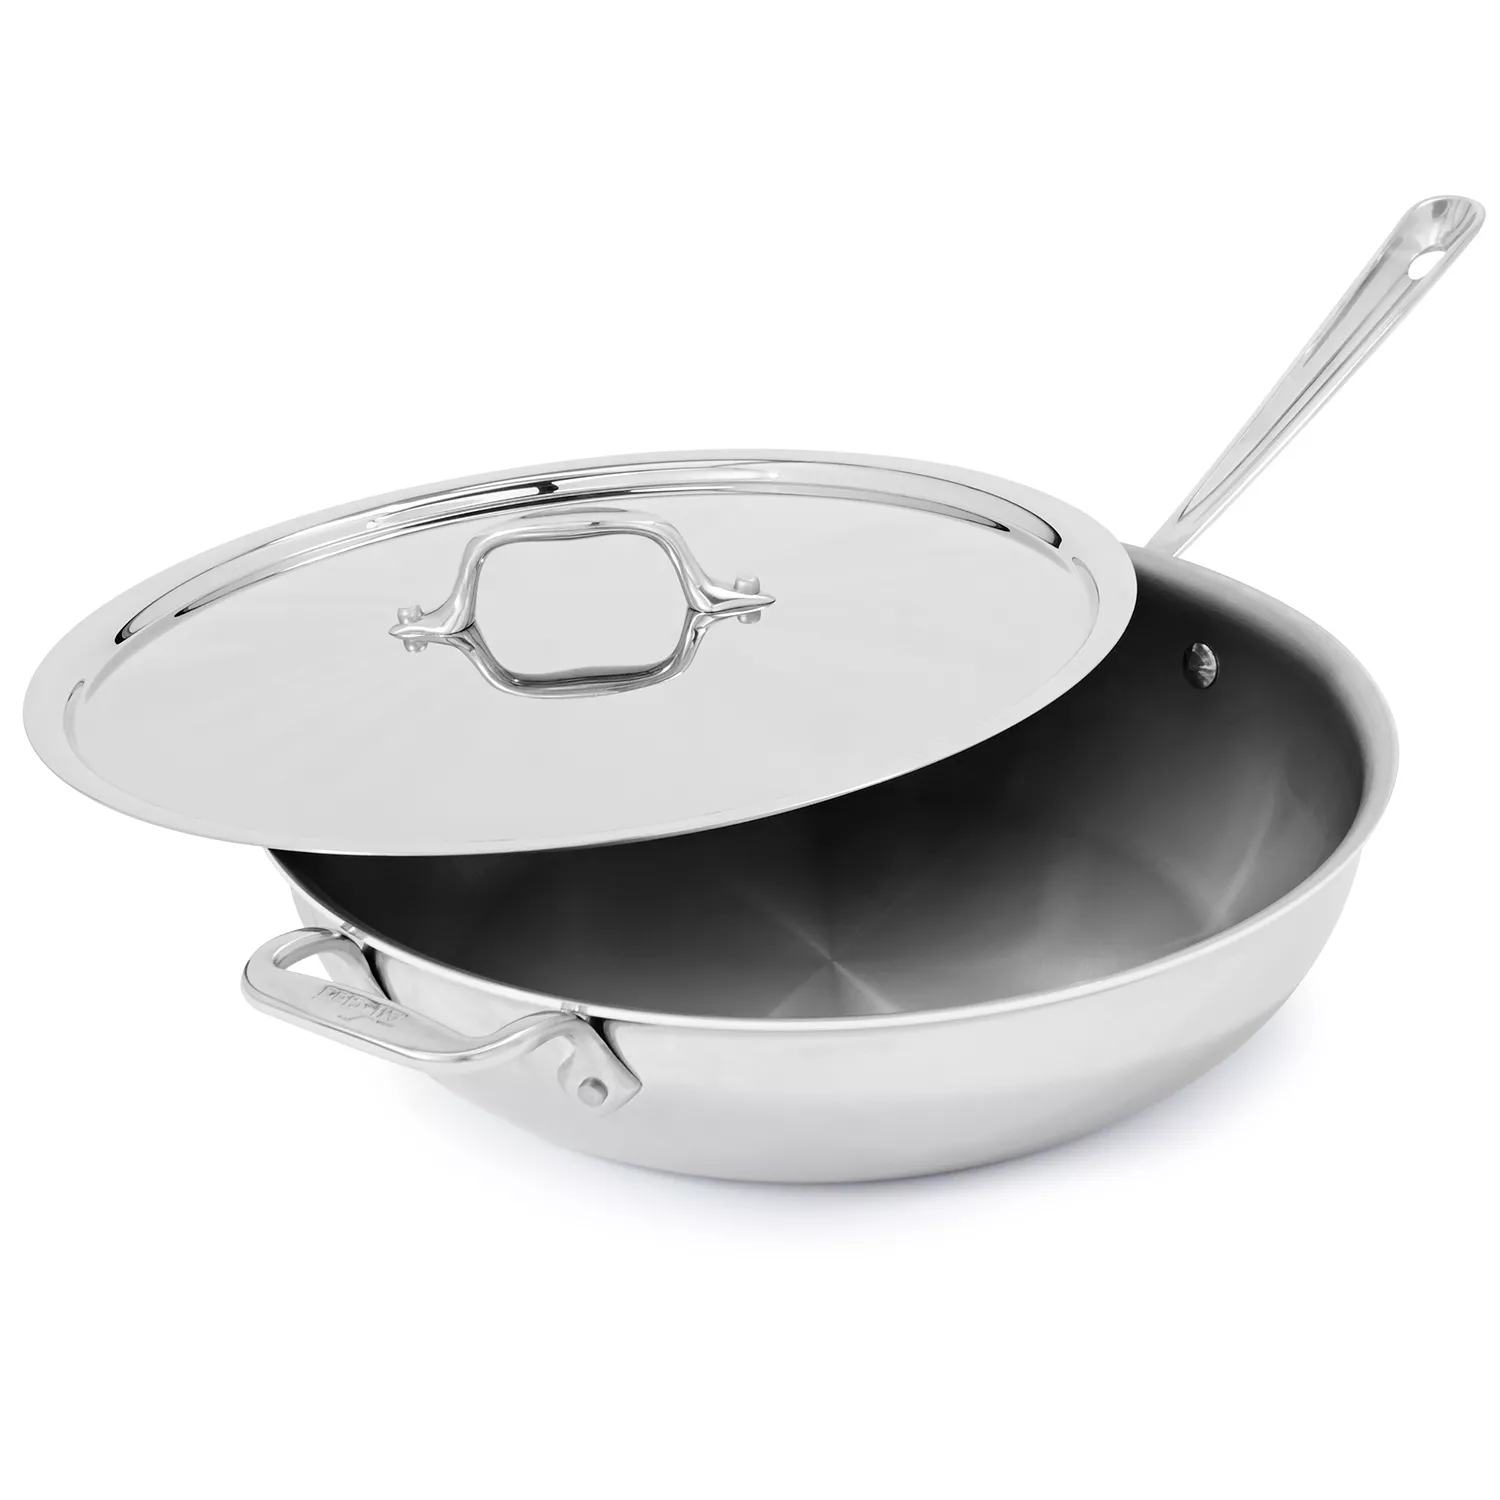 All-Clad cookware: Save on pots, pans and bakeware at this huge